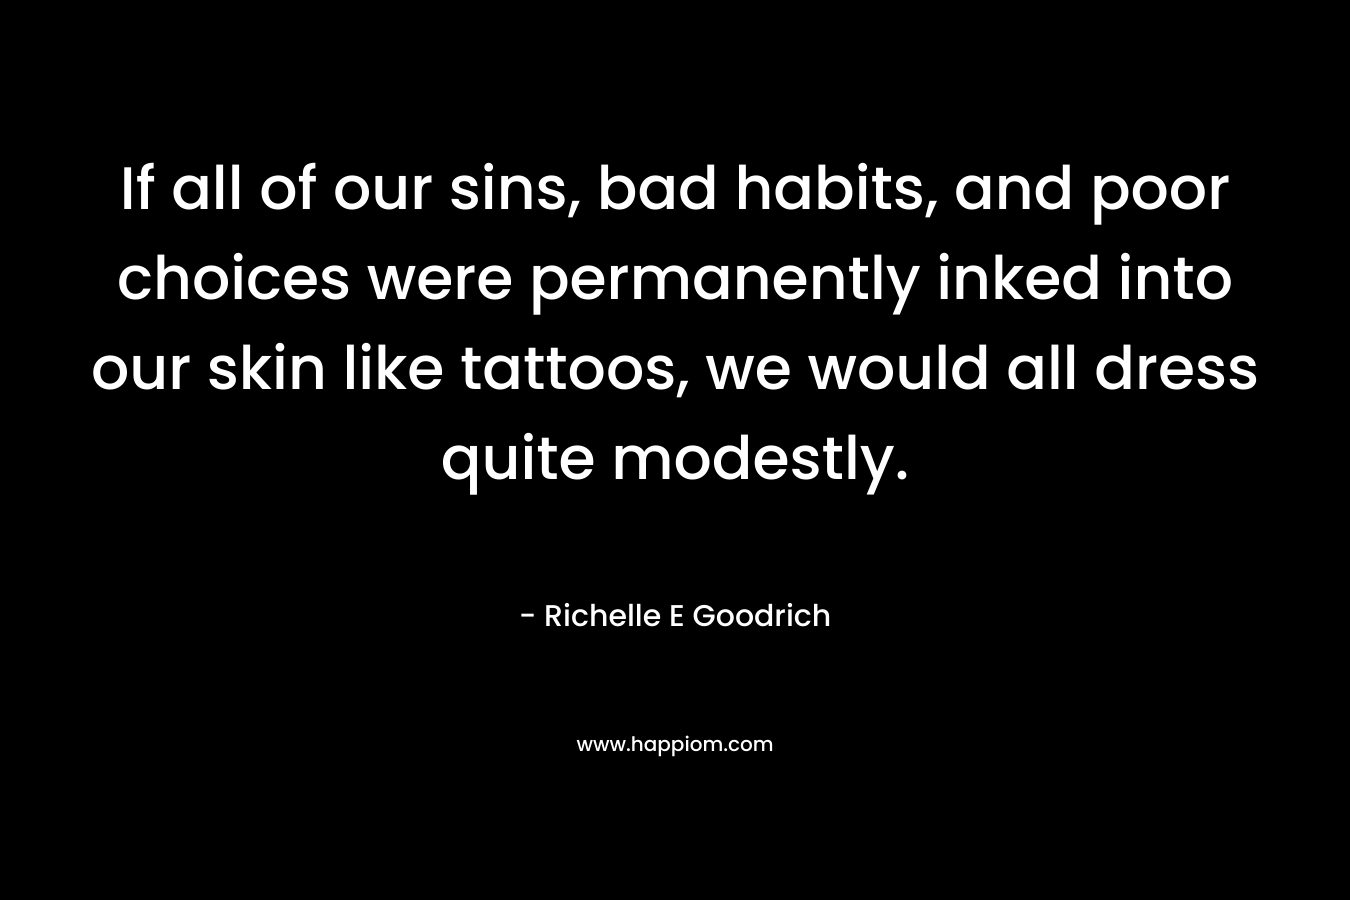 If all of our sins, bad habits, and poor choices were permanently inked into our skin like tattoos, we would all dress quite modestly.